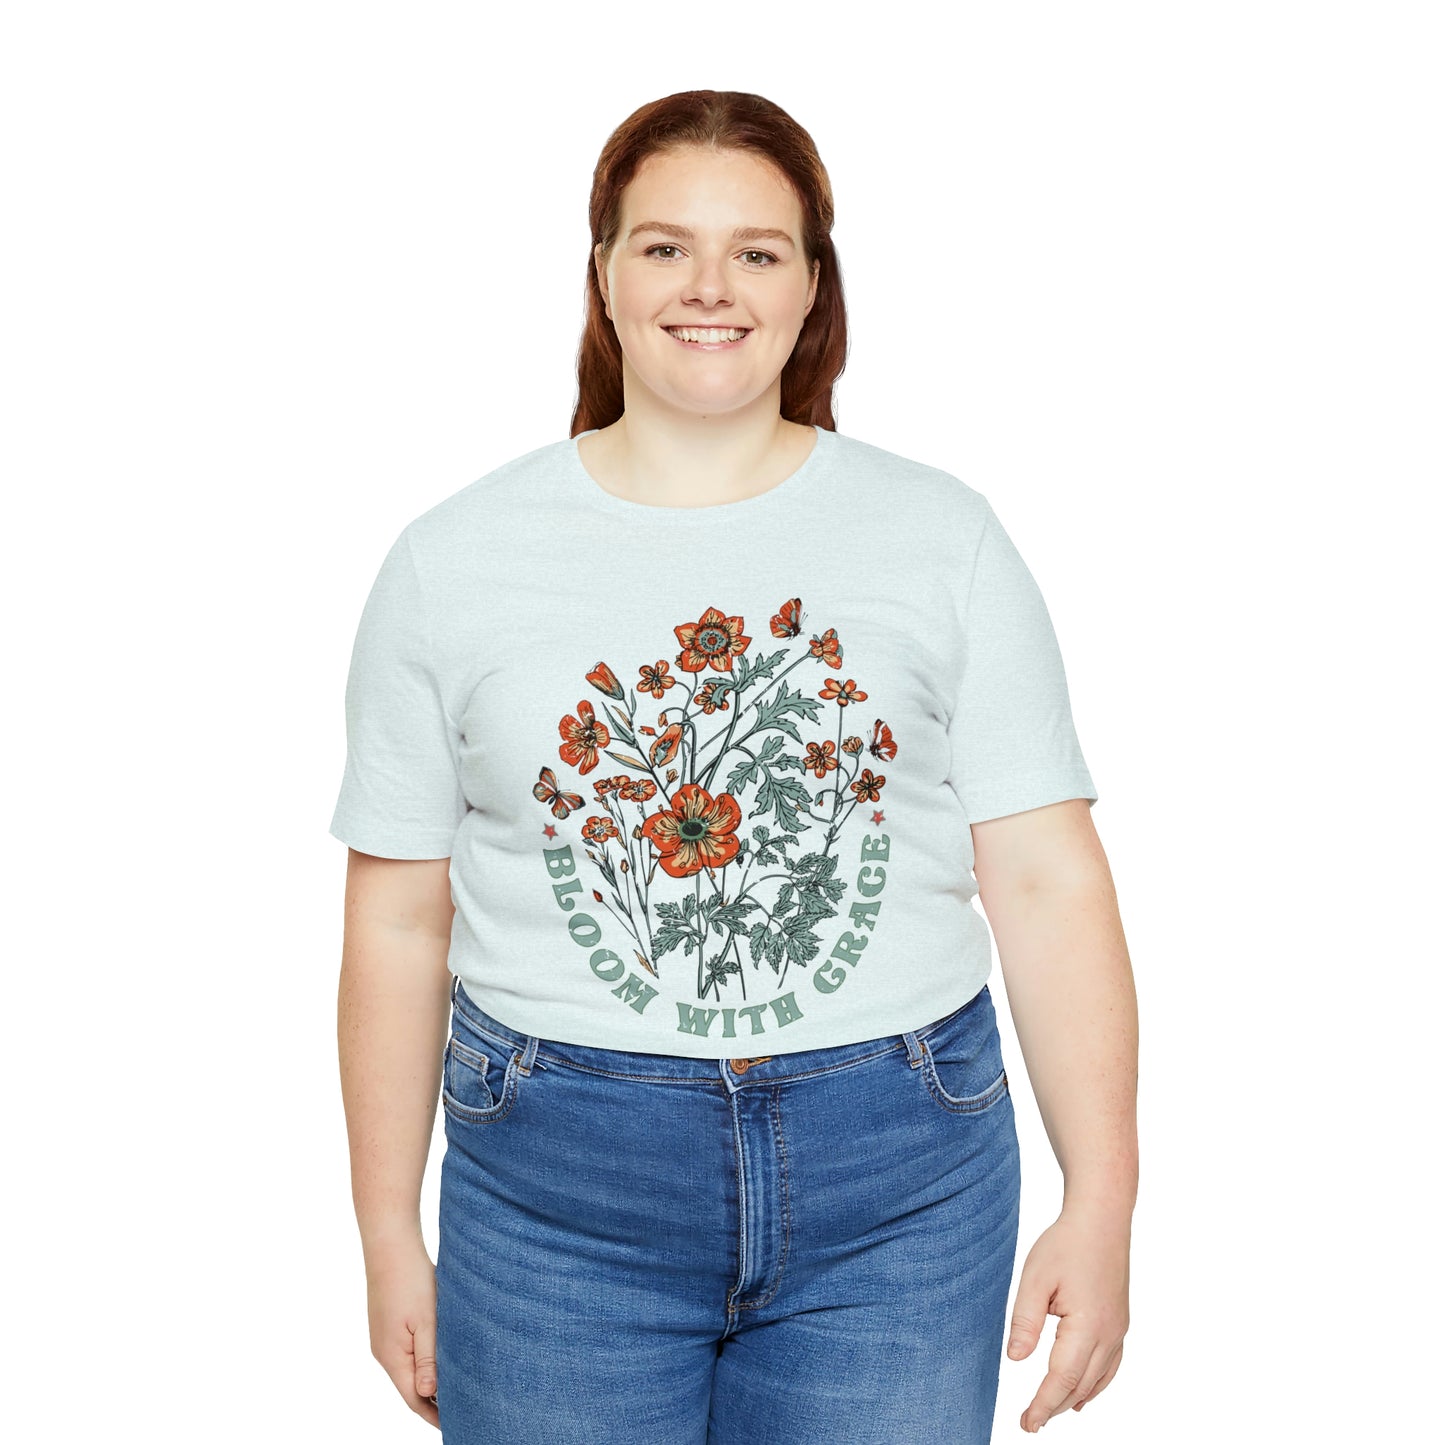 "Bloom With Grace" Bella Canvas Short Sleeve Tee